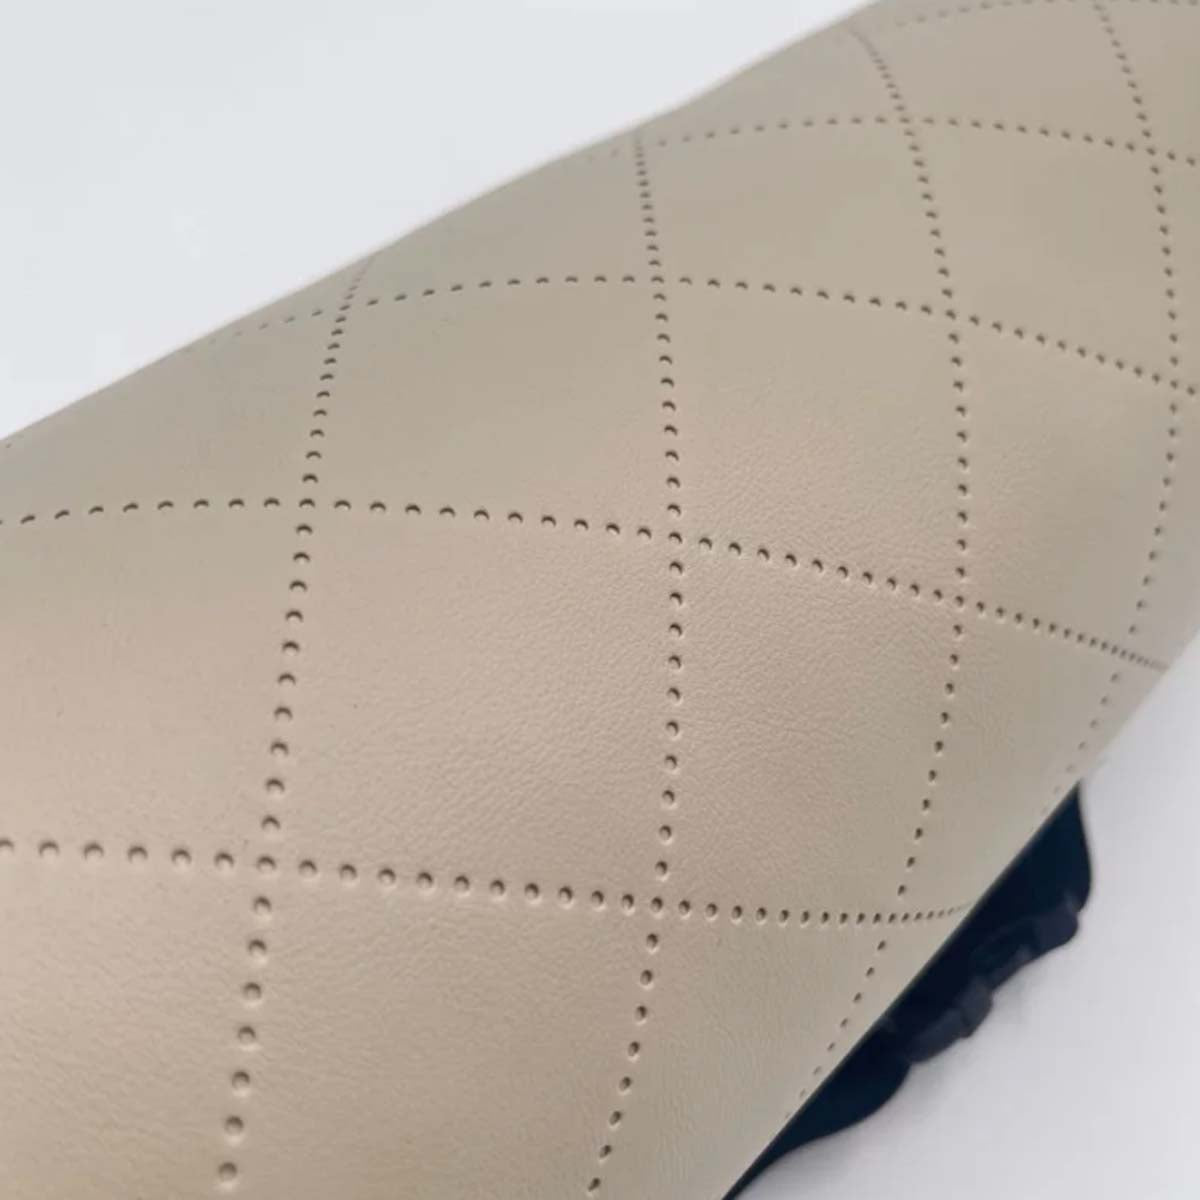 New Car Neck Pillow with Diamond Embossed Design for Universal Auto Safety and Comfort. - Delicate Leather